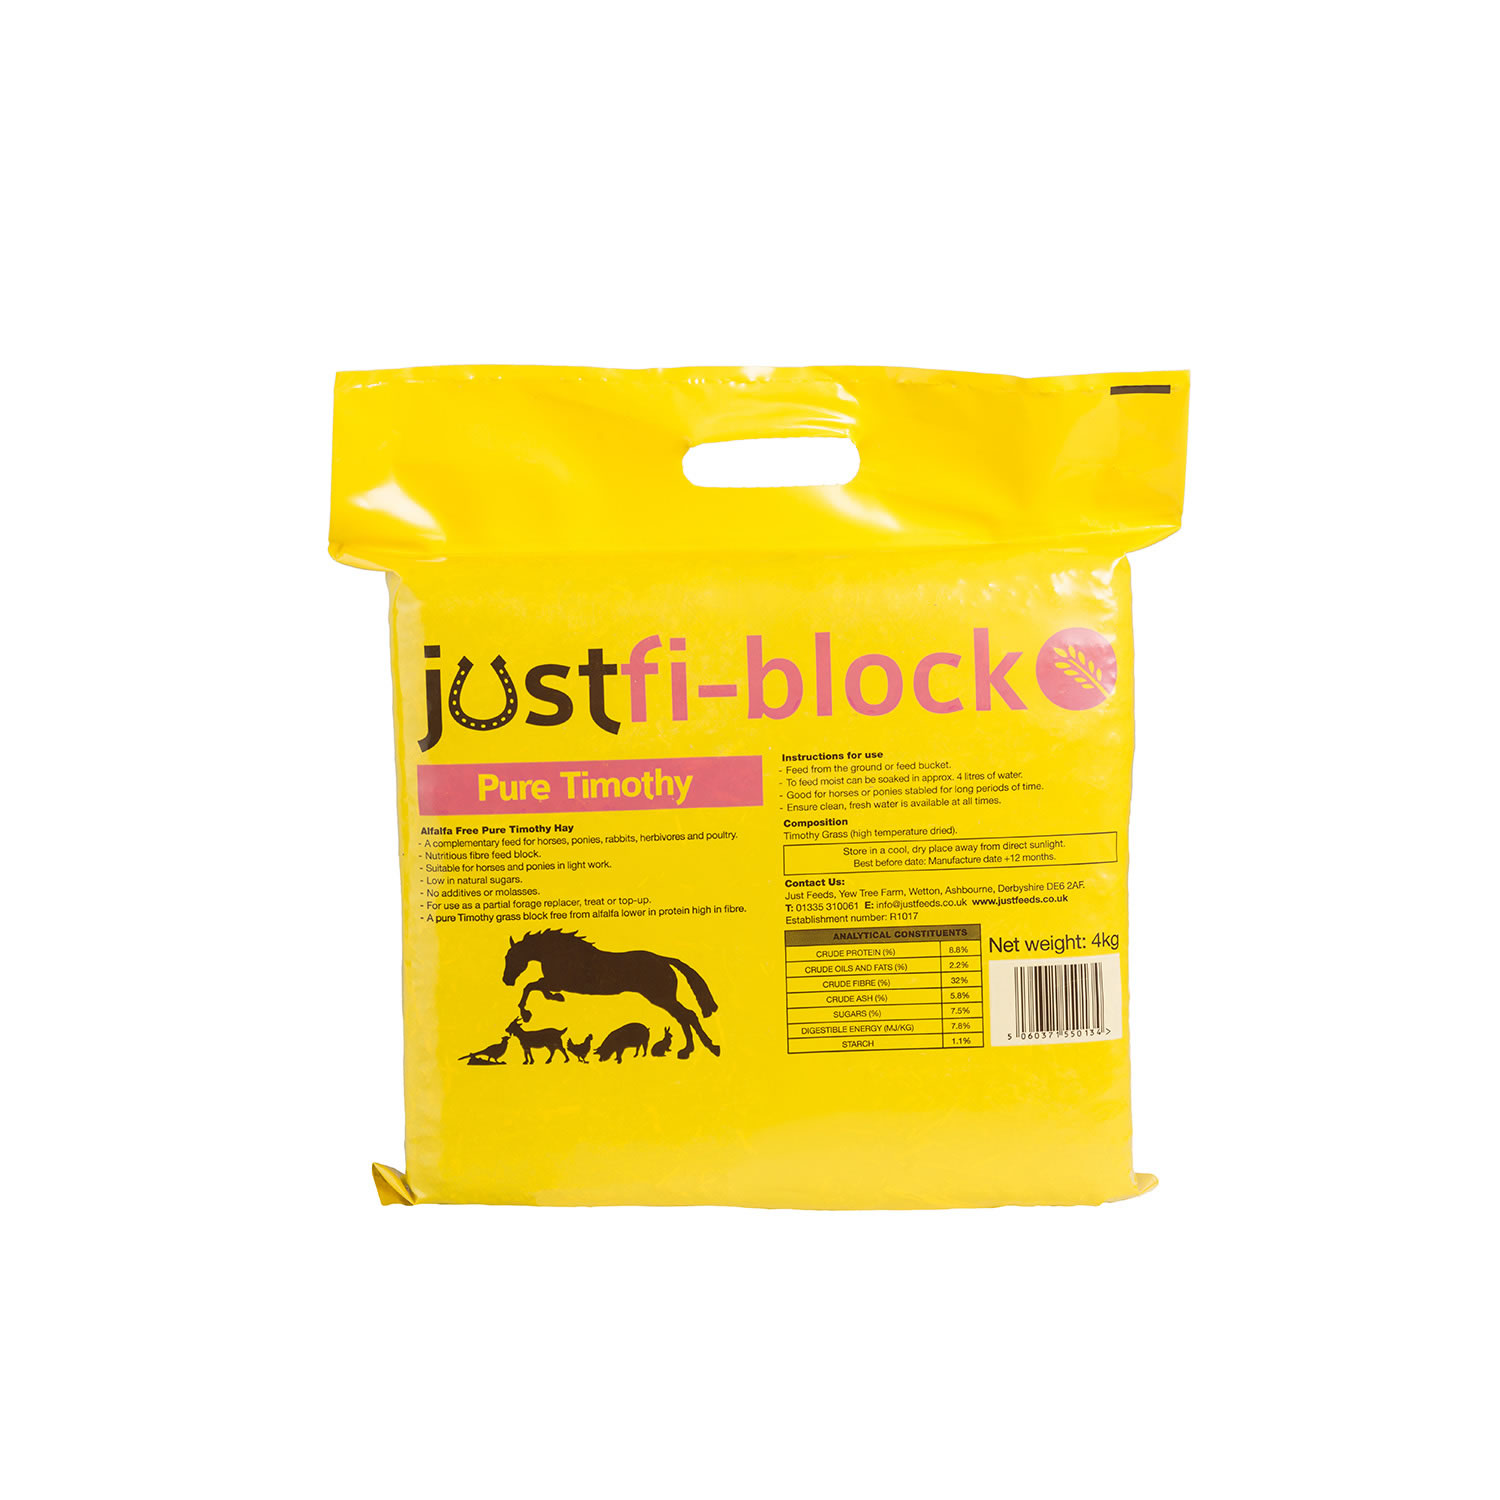 JUST FI-BLOCK PURE TIMOTHY 1 KG x 4 PACK 1 KG x 4 PACK PURE TIMOTHY